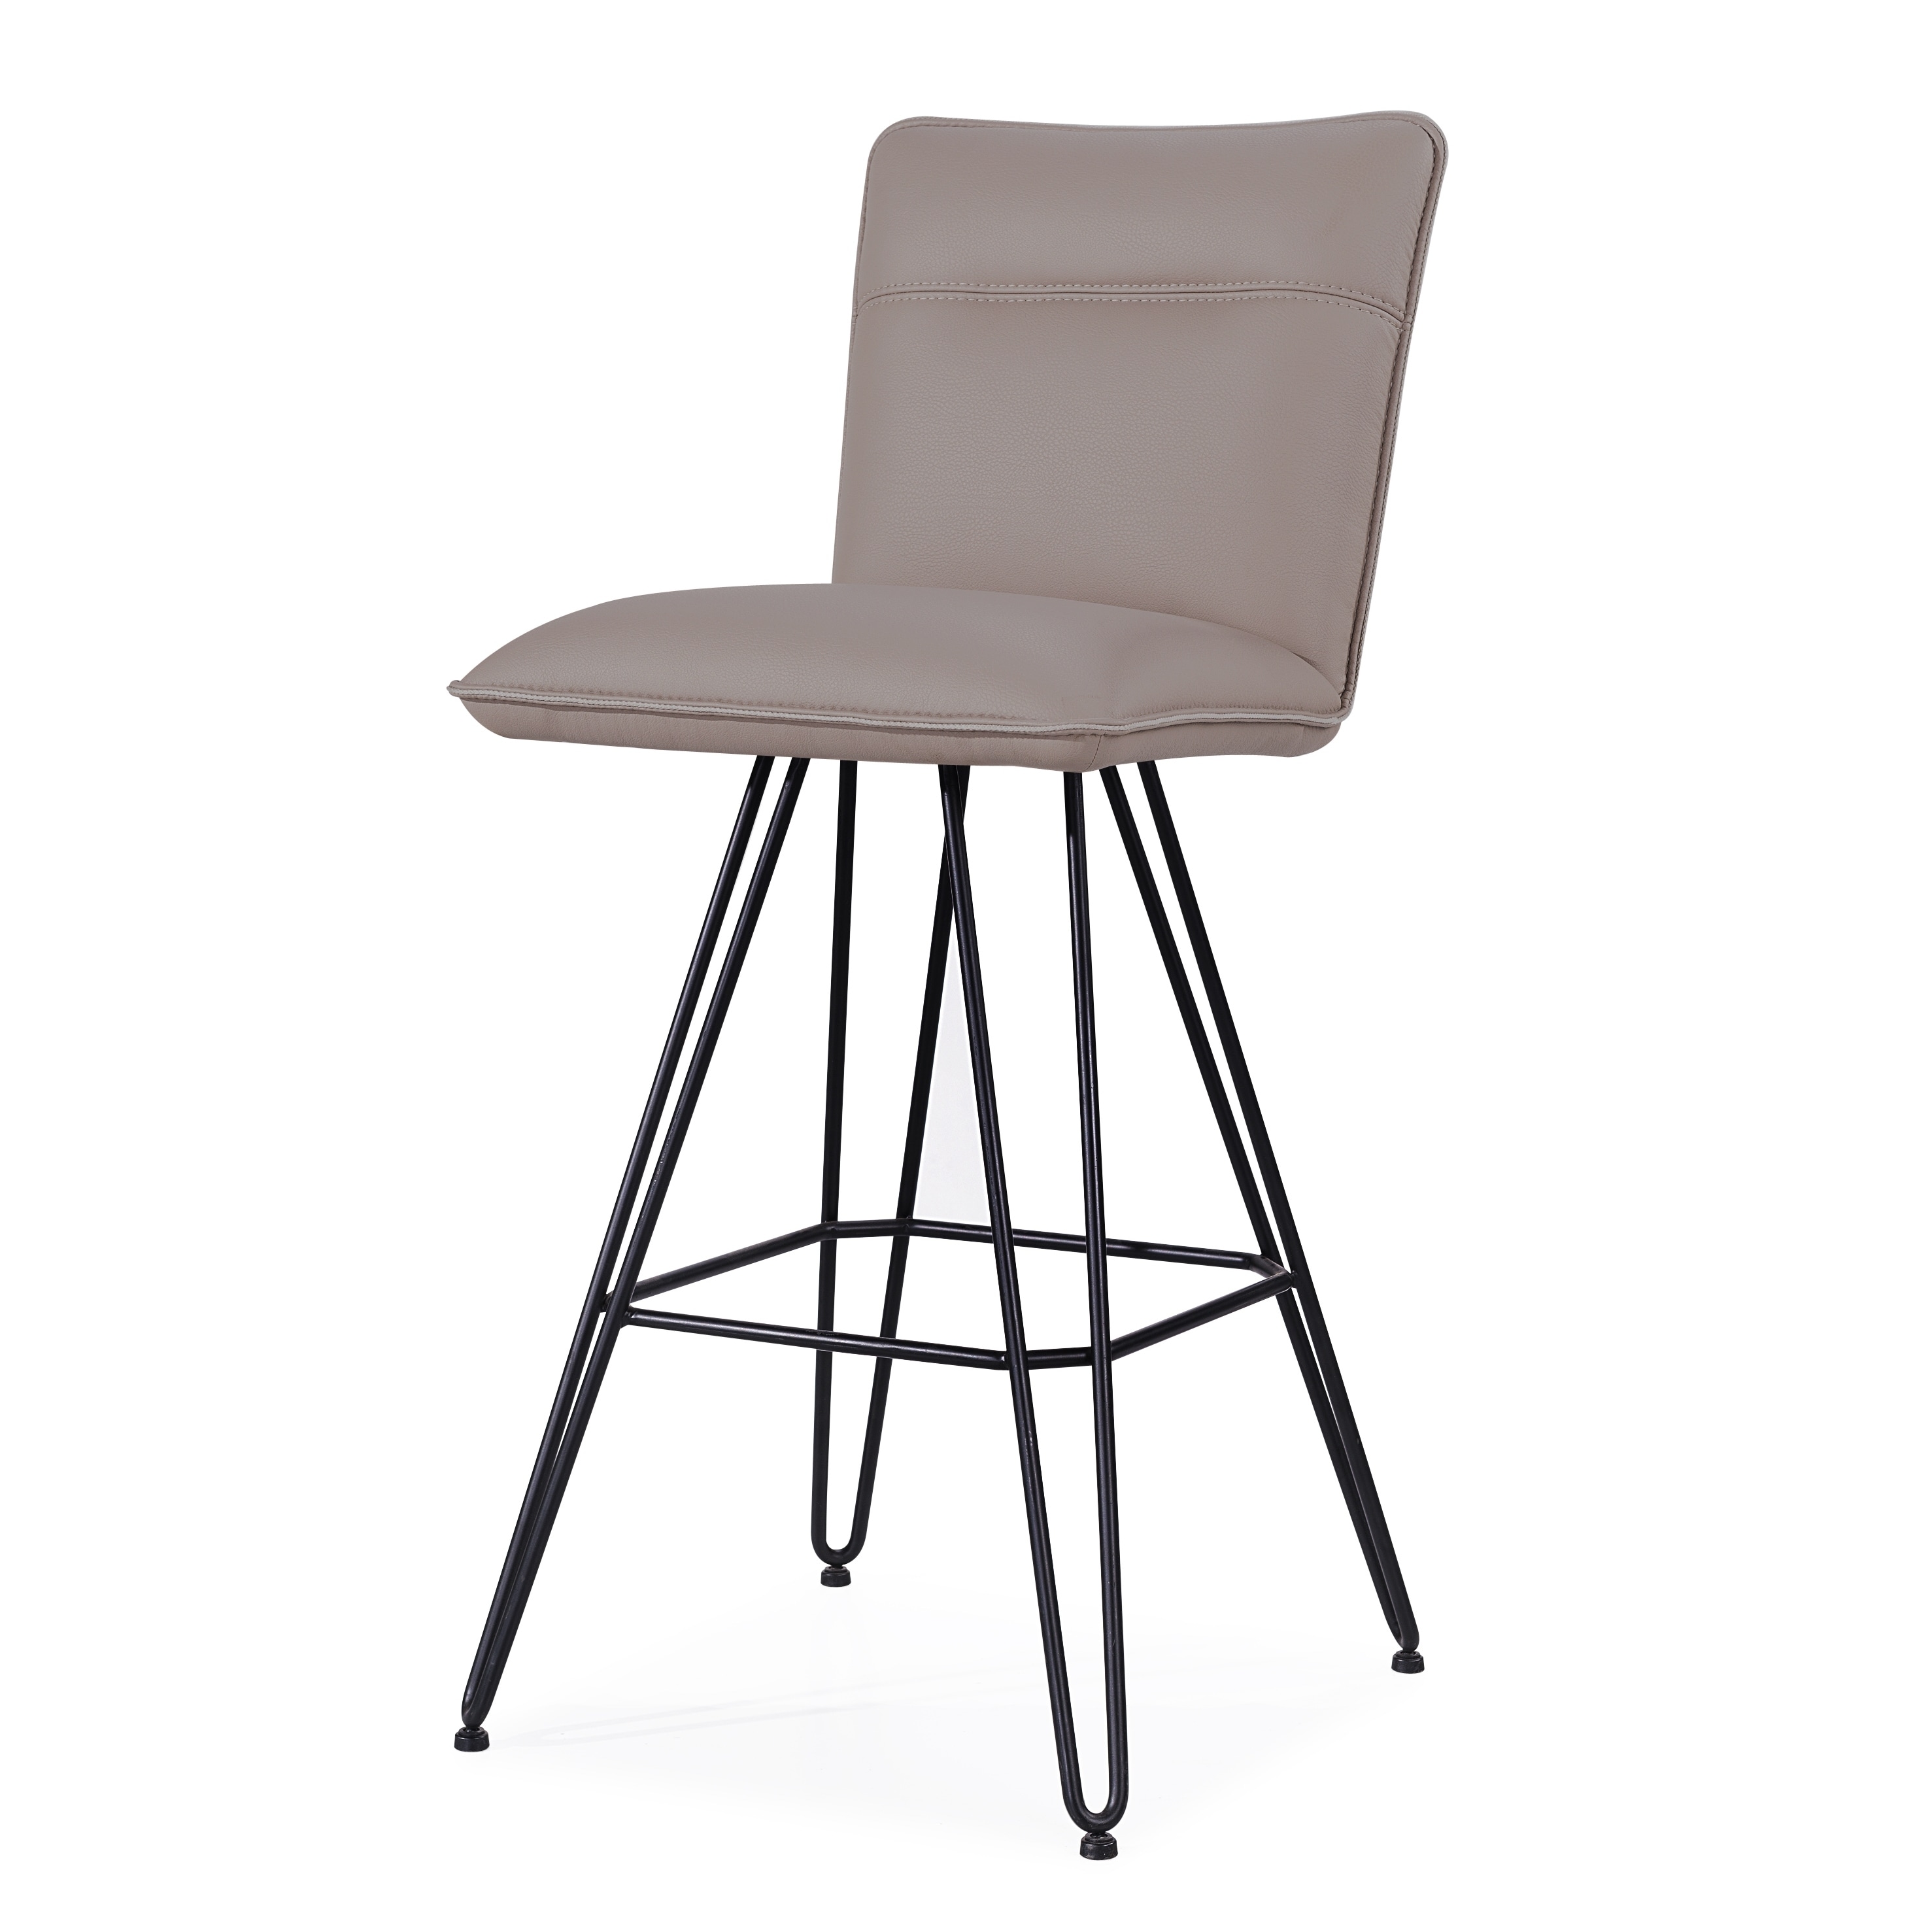 Metal Leather Upholstered Bar Height Stool with Hairpin Style Legs Set of 2, Taupe and Black - 41 H x 18 W x 21 L Inches